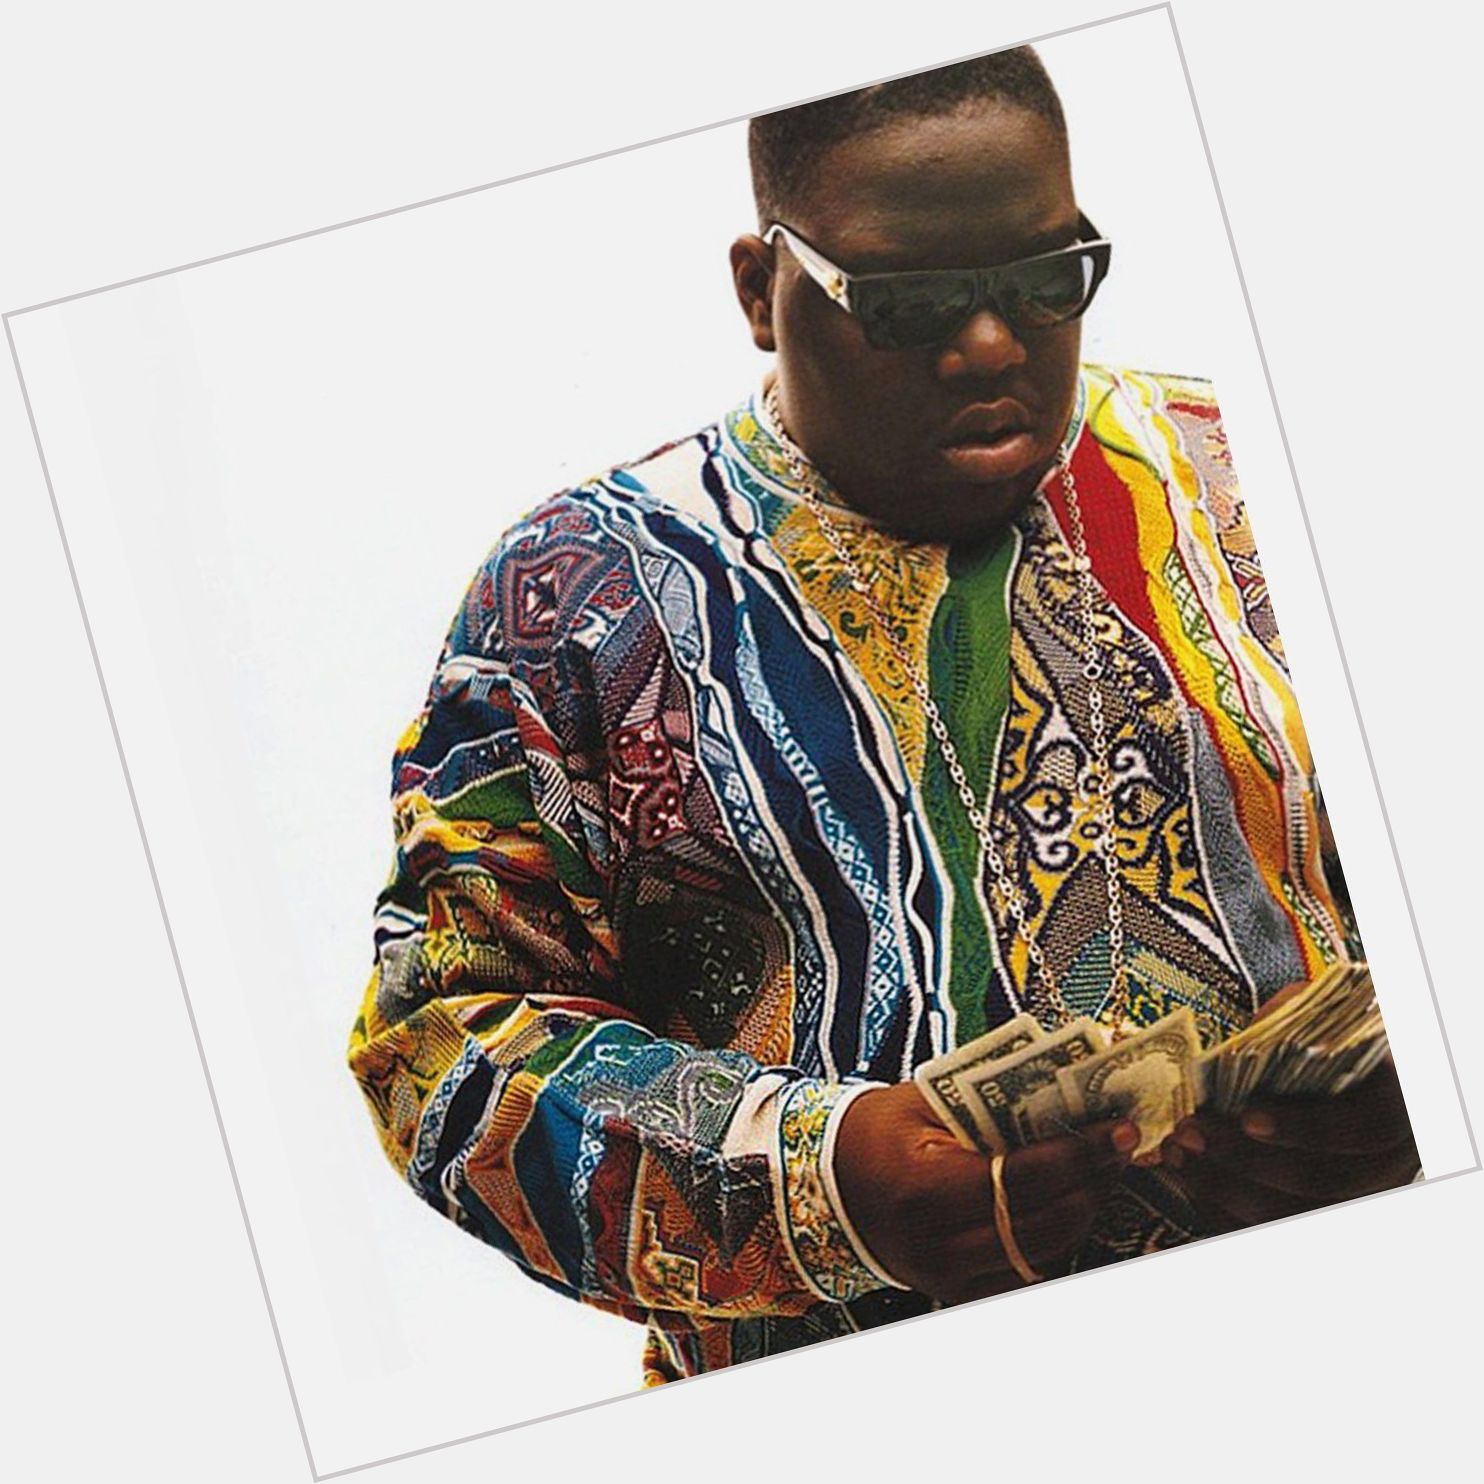 A special happy birthday shoutout to the one and only Notorious B.I.G. Name your Top 5! 